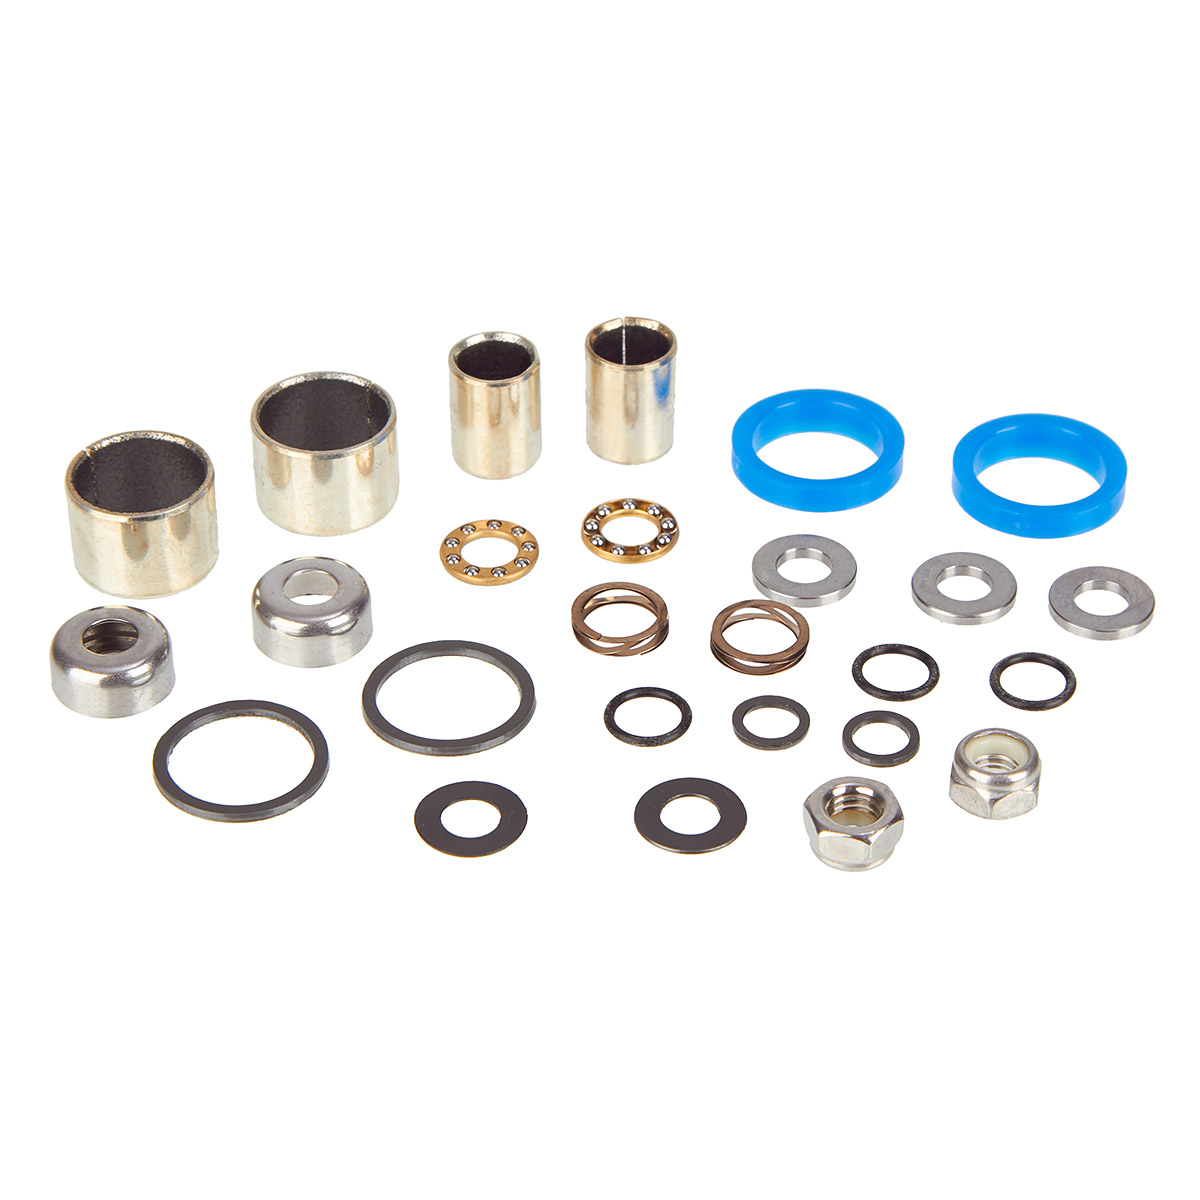 HT Components Pedal Bearing Kit  for EVO Pedals starting 2015